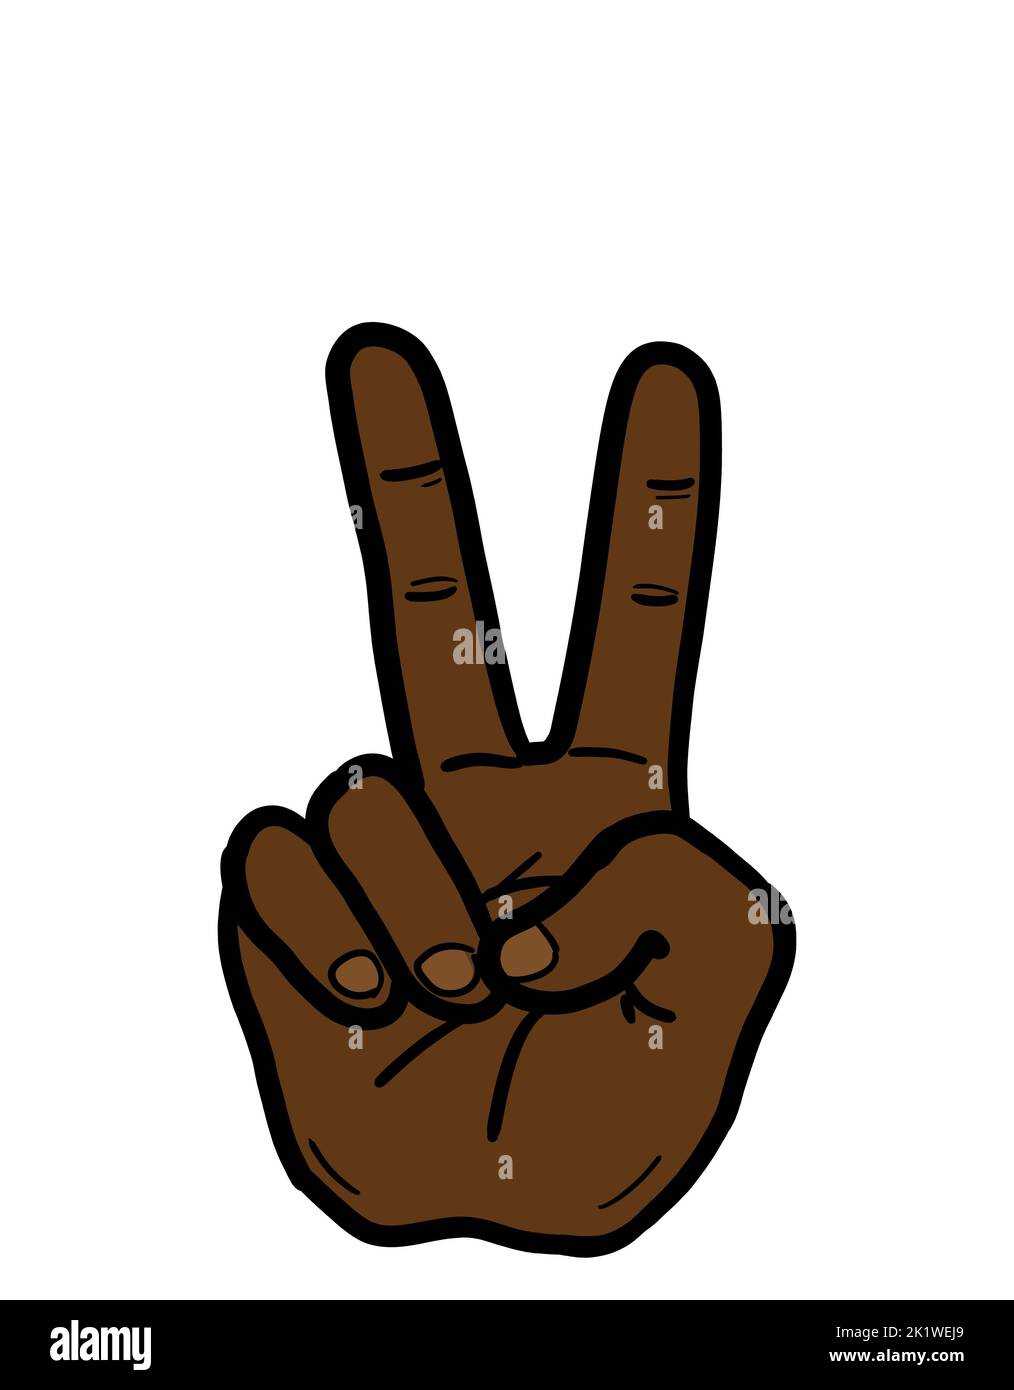 Black Lives Matter. The V sign is a hand gesture of African American ethnicity as a symbol of victory, peace, success and anti racism. Stock Photo